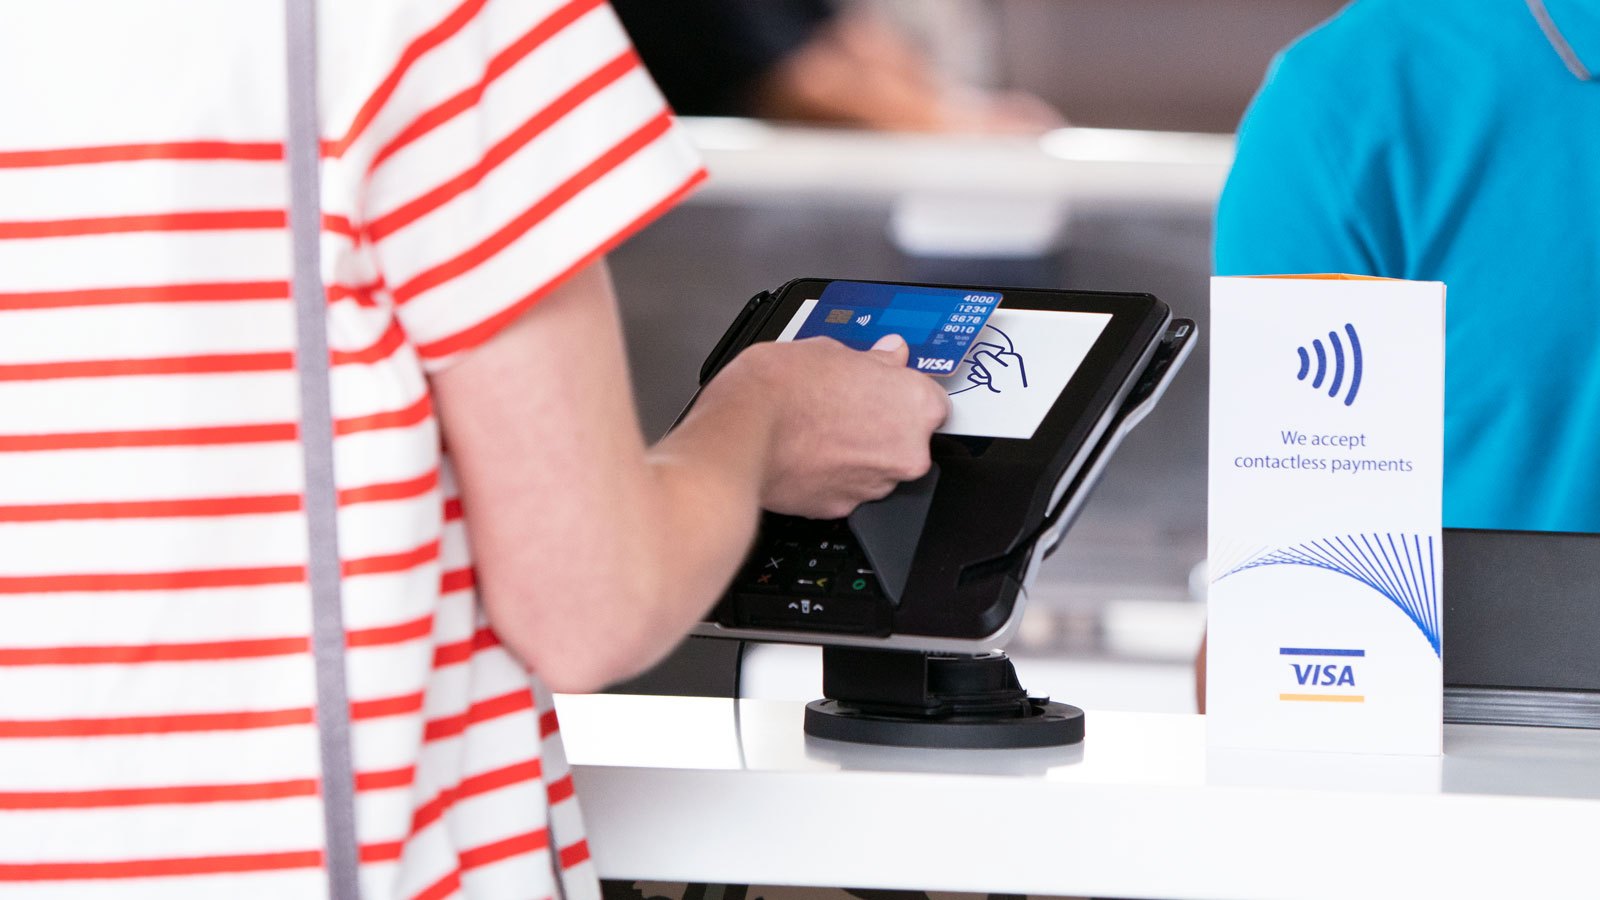 Contactless Card Payment - Learn More About this Technology